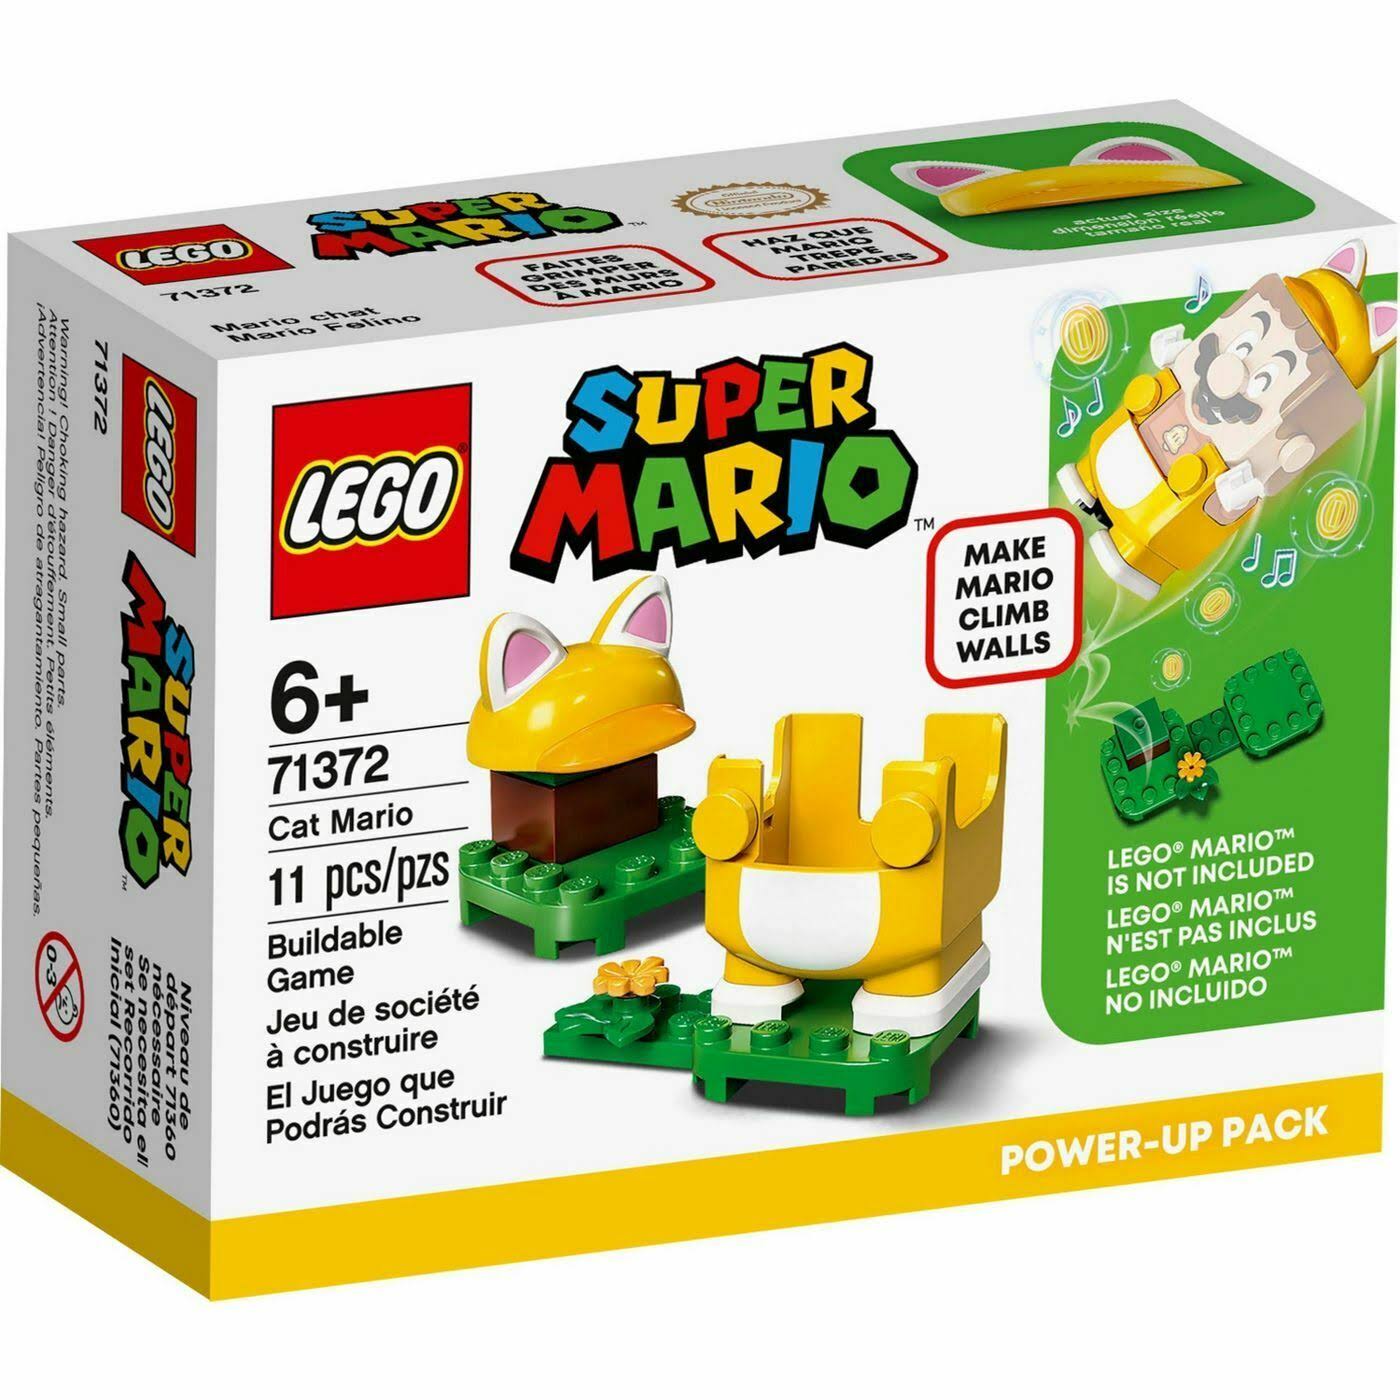 Lego 71372 Super Mario Cat Mario Power-Up Pack New with Box